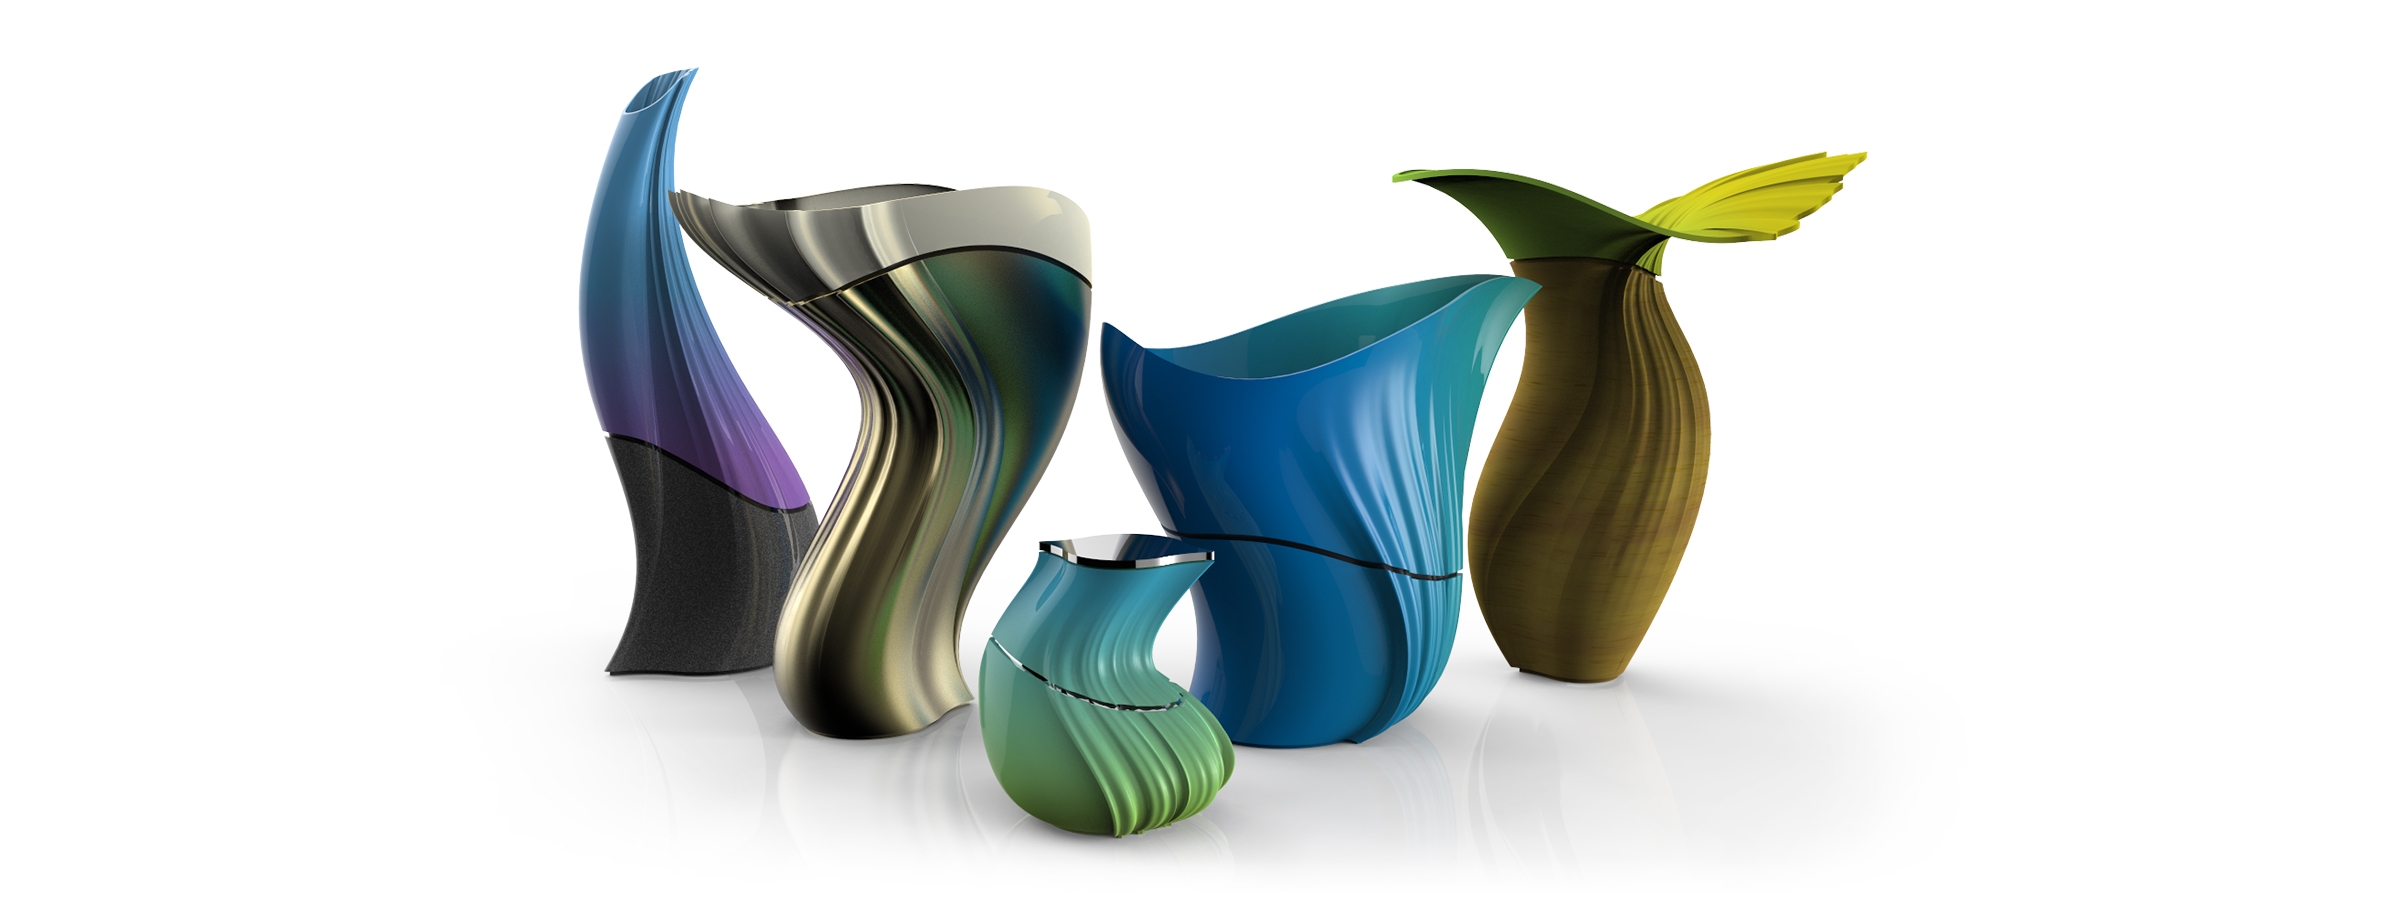 Customisable urns with elegant surface patterns.